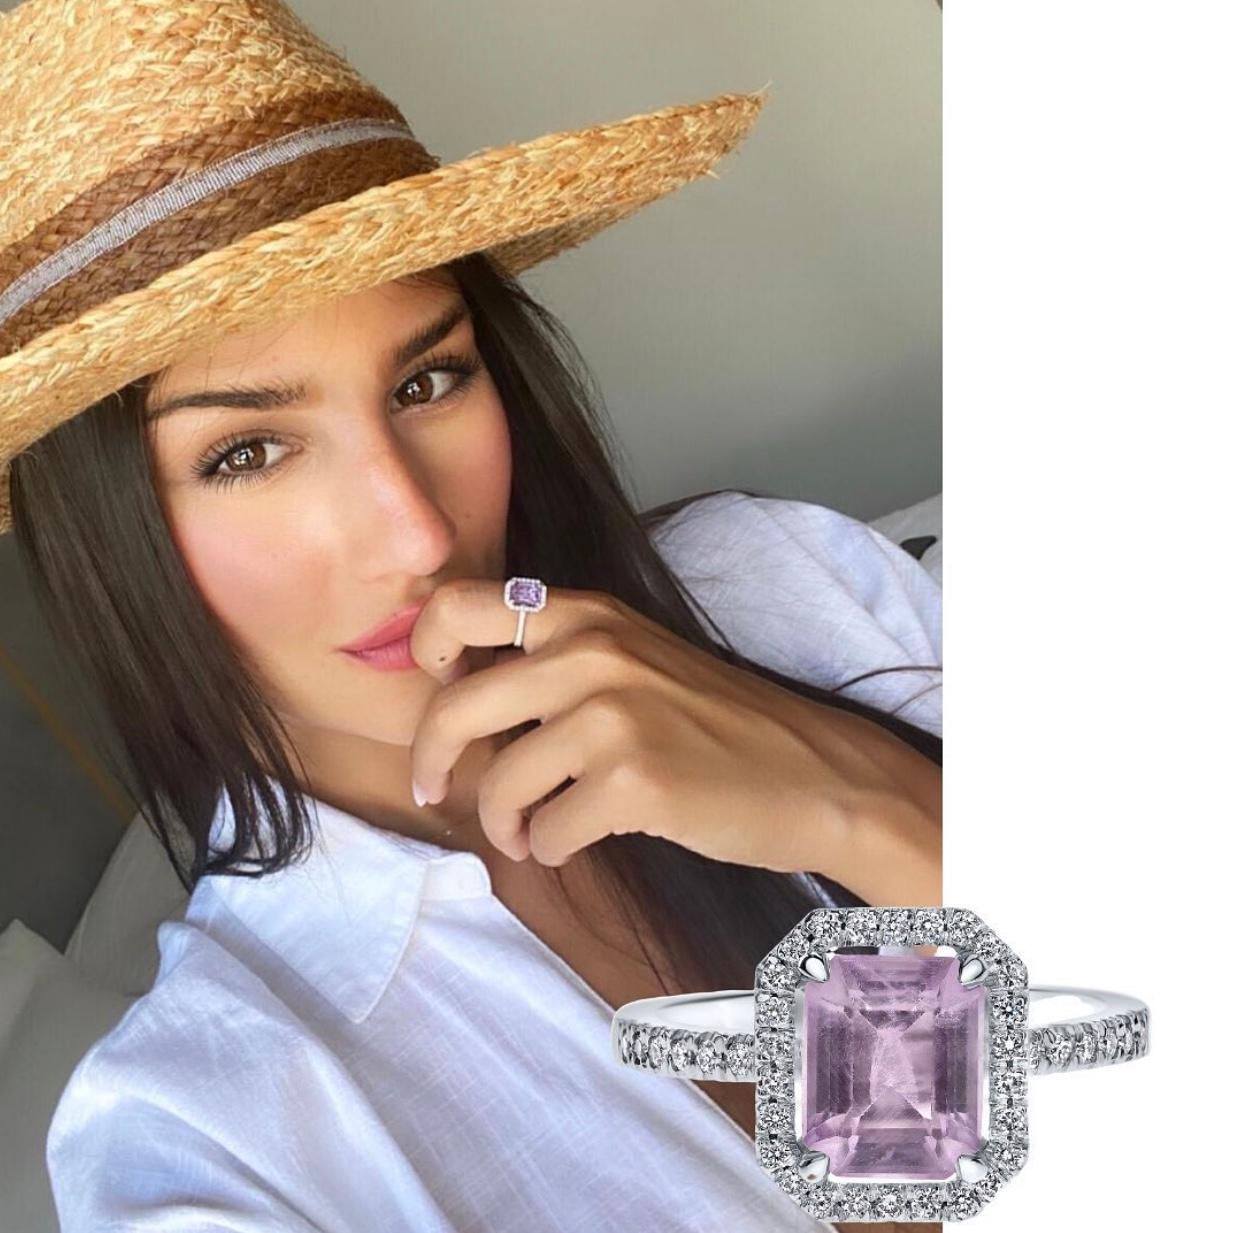 Modern 1.65 Carat Emerald Cut Amethyst and Diamonds Ring in White Gold - Shlomit Rogel For Sale